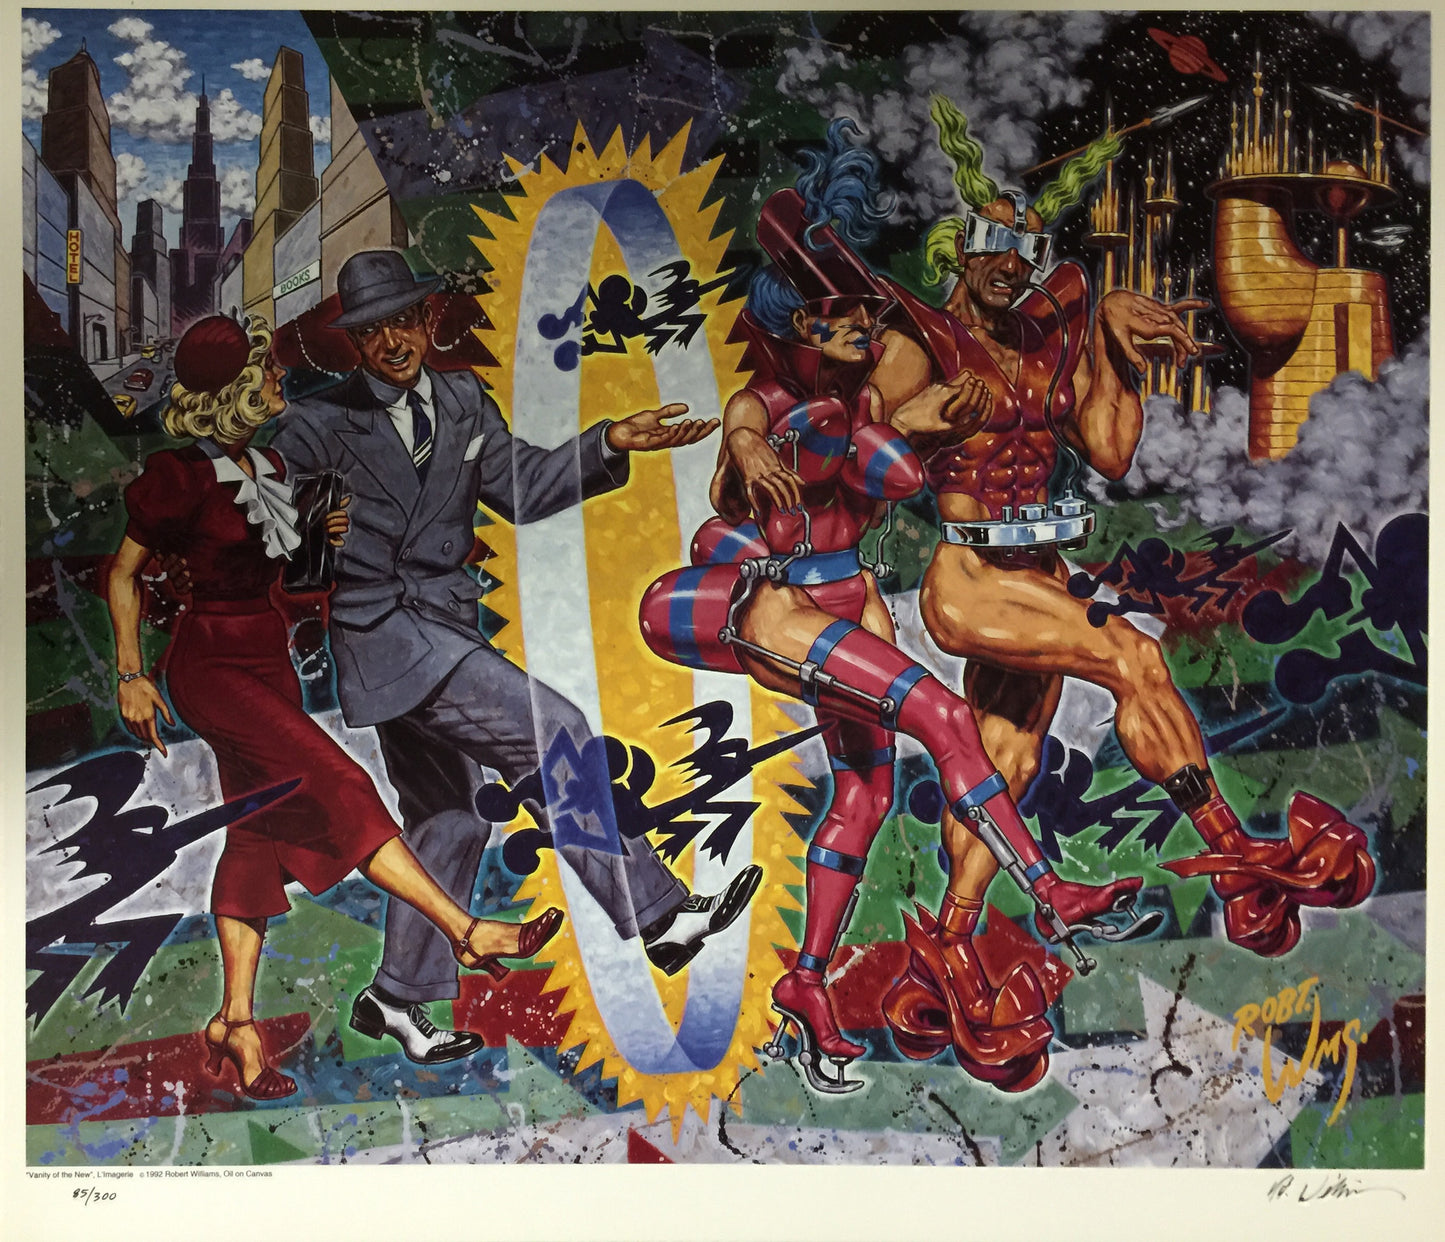 Robert Williams - 1992 - Vanity of the New Poster (Signed/Numbered)